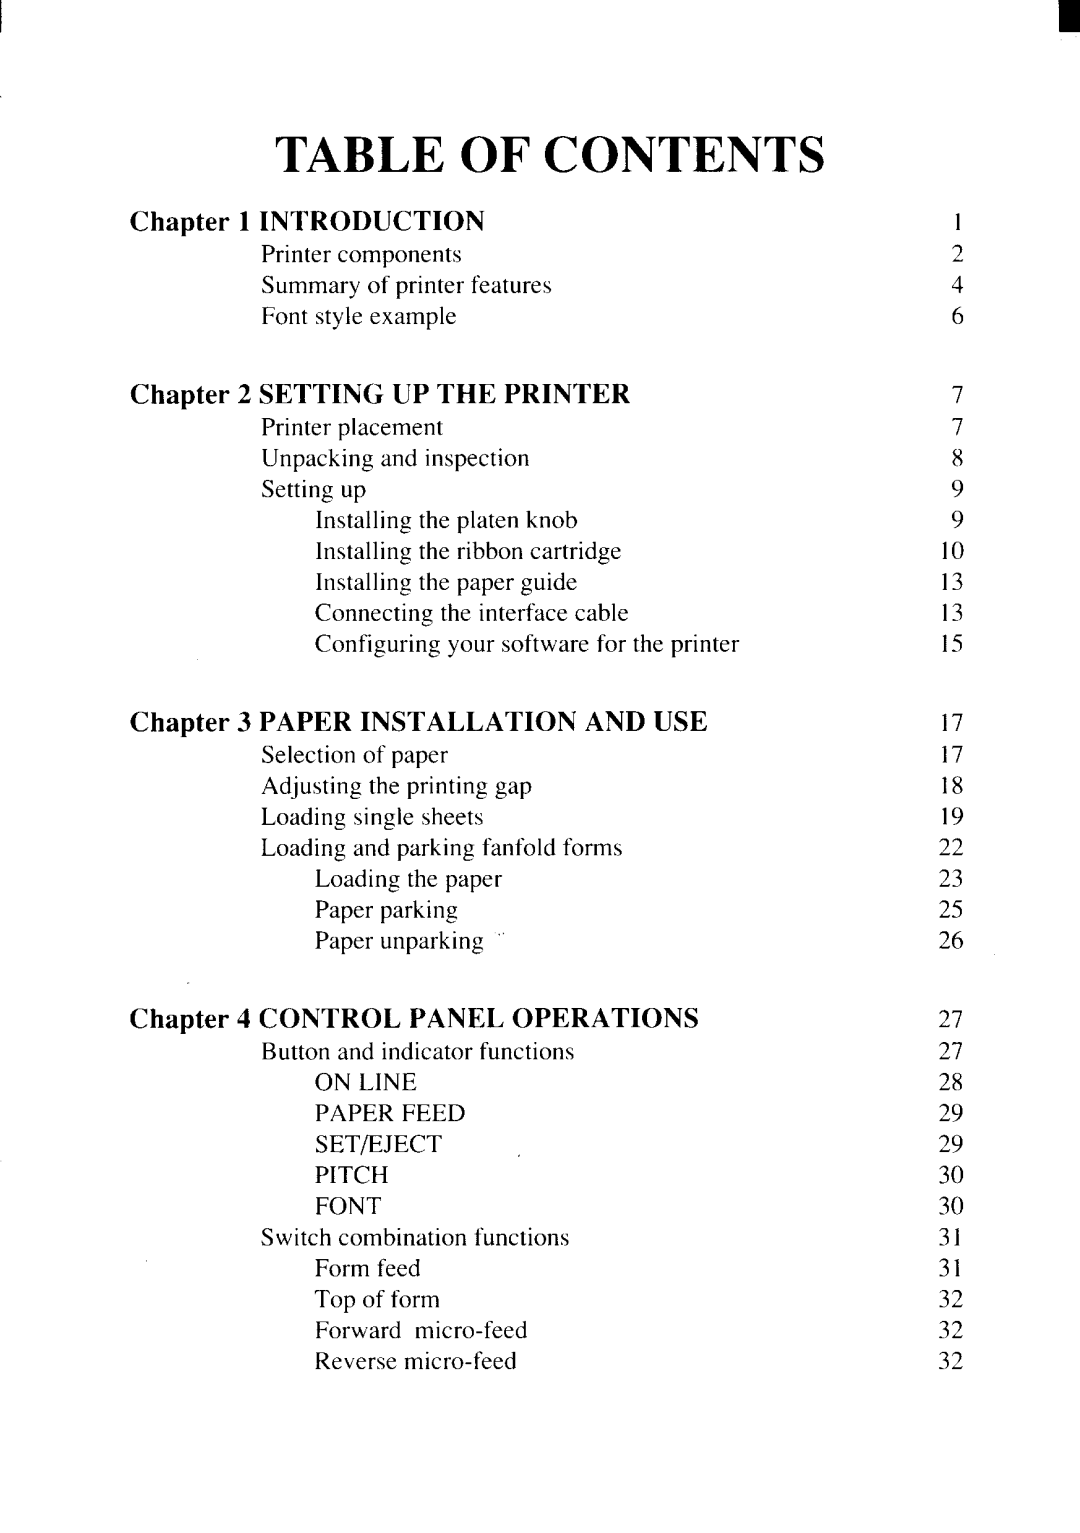 Star Micronics NX-2415II user manual Table Of Contents, Introduction, Setting Up The Printer, Paper Installation And Use 